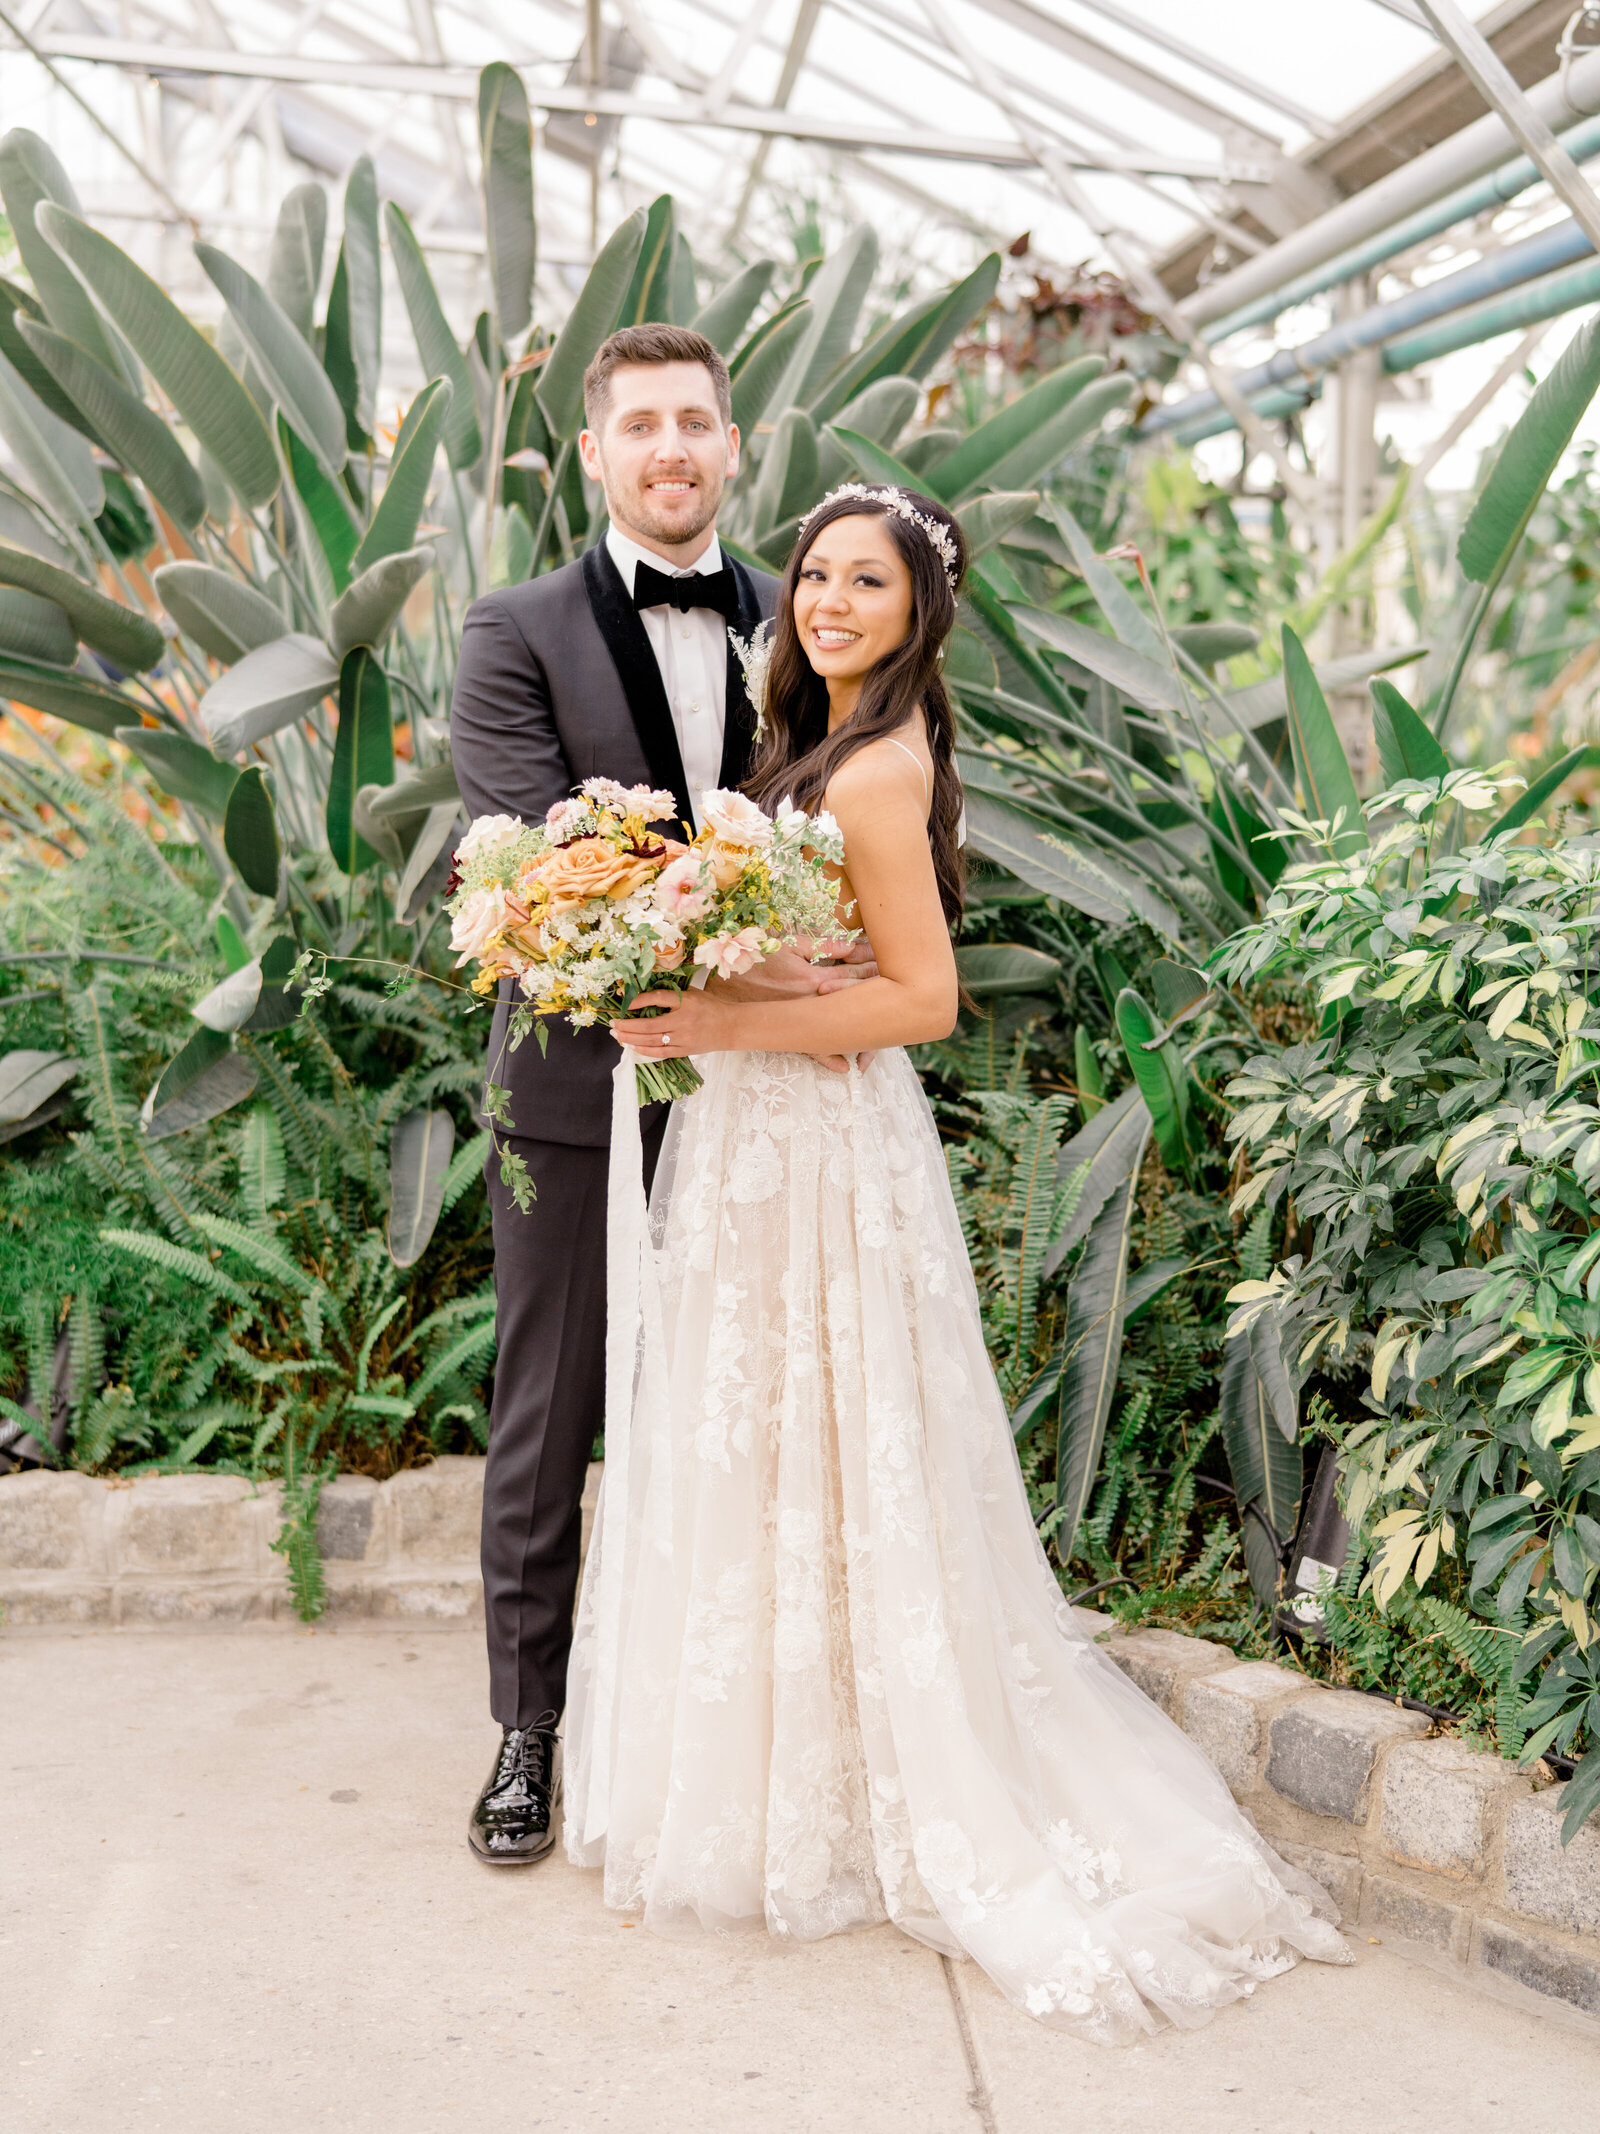 Melissa and Keith - Fairmount Park Horticulture Center - Magi Fisher - 240